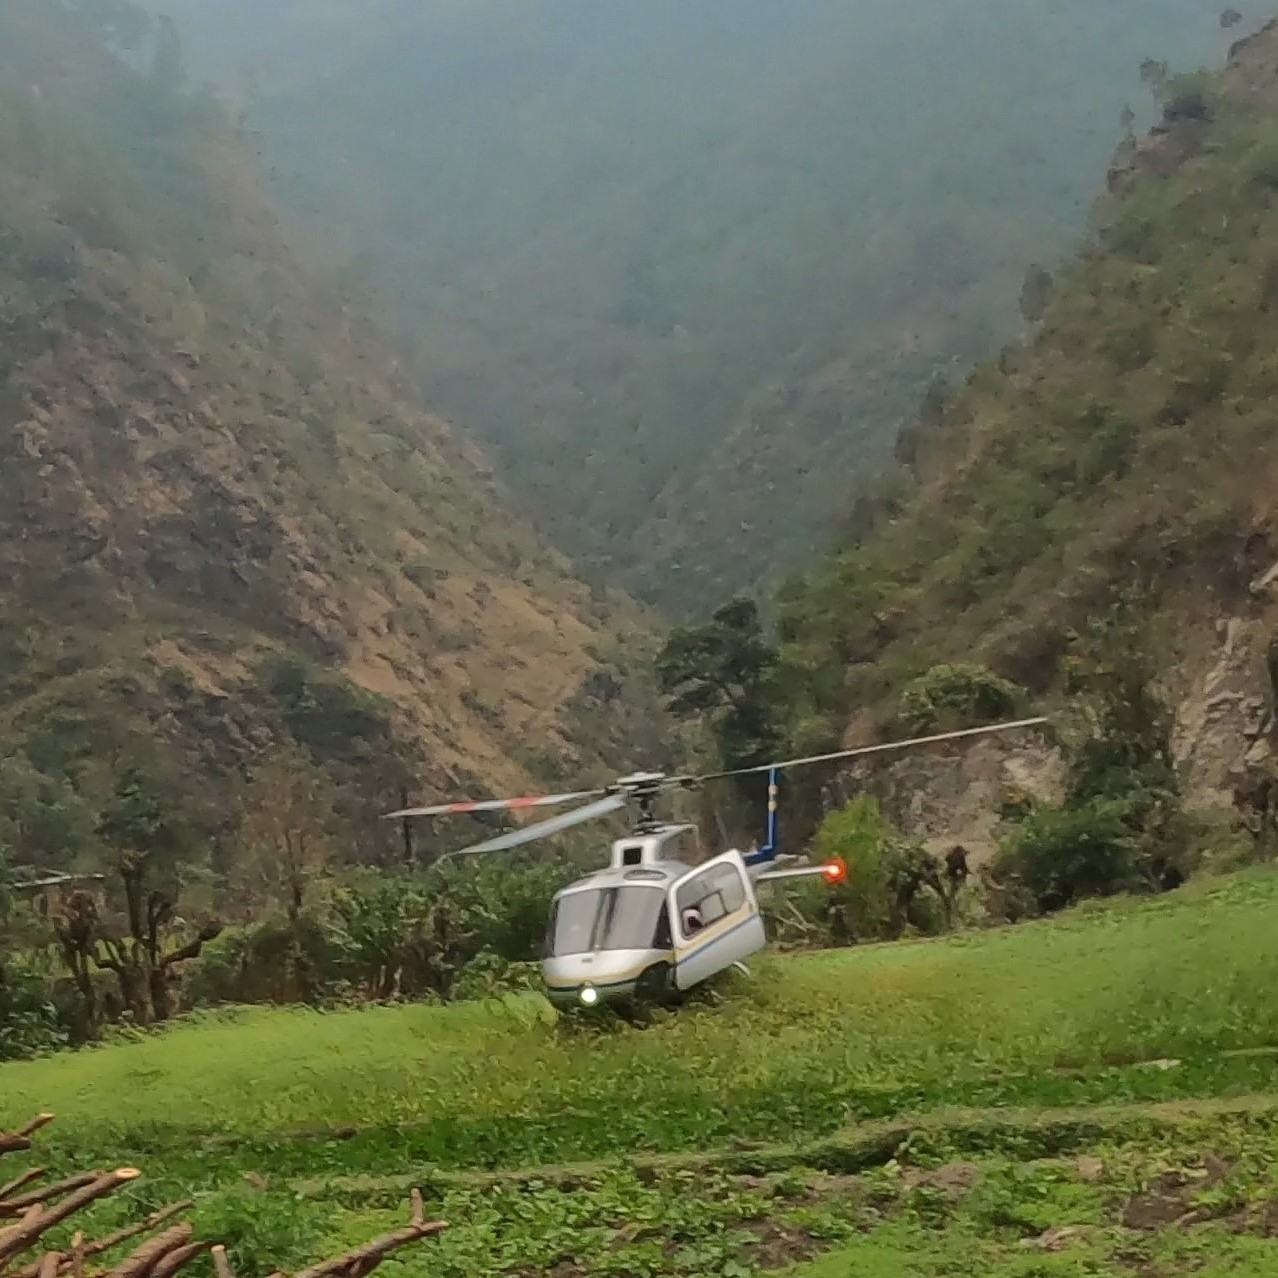 A helicopter from Nepal was scrambled by international rescuers